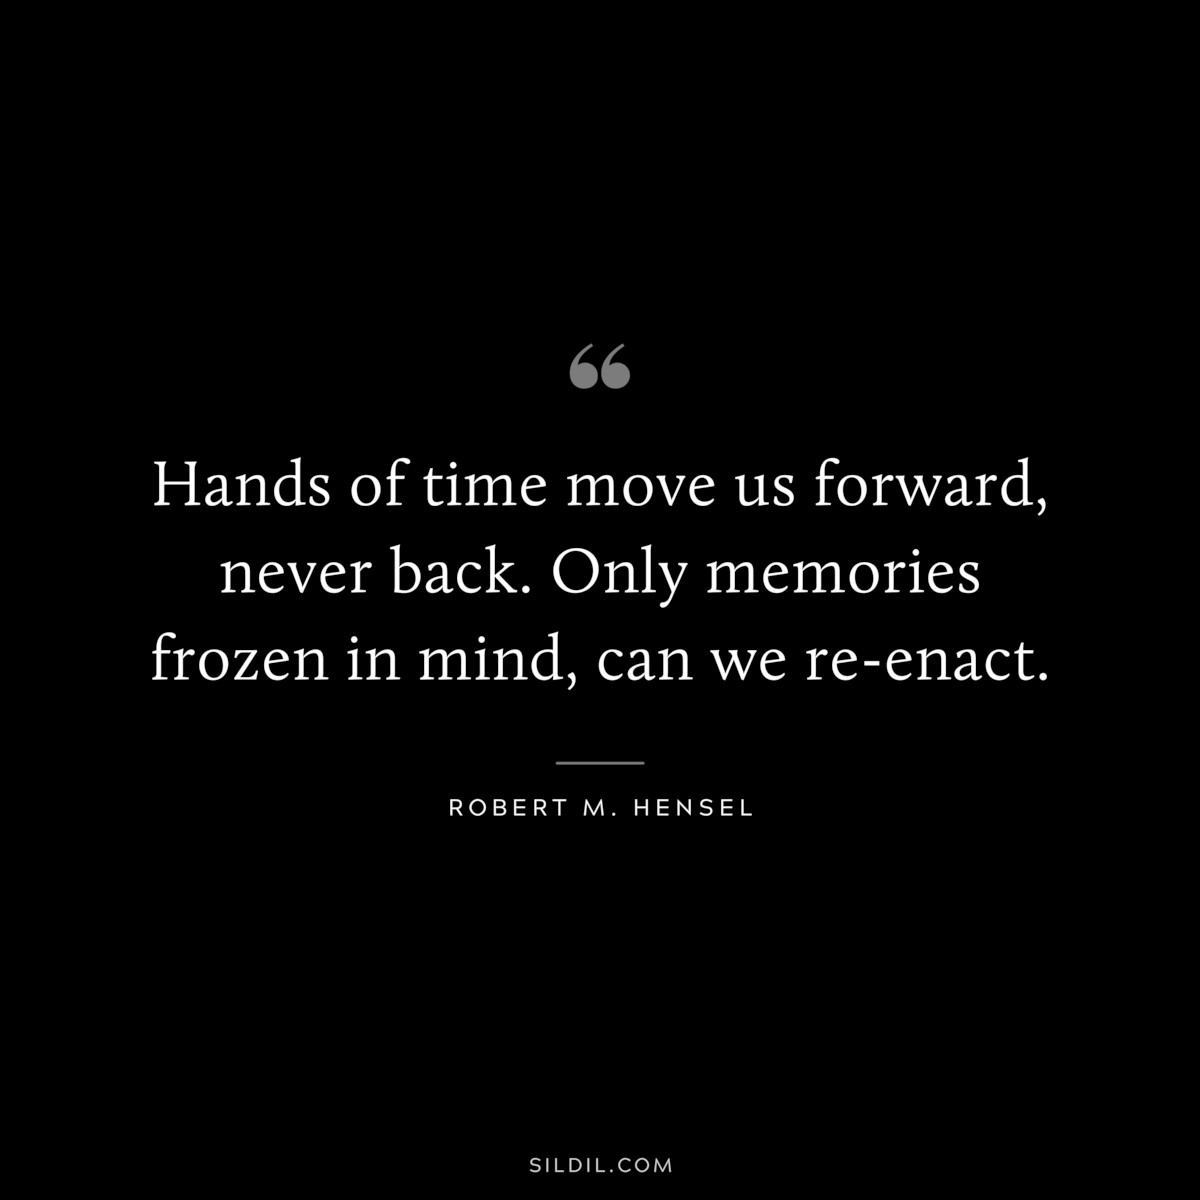 Hands of time move us forward, never back. Only memories frozen in mind, can we re-enact. ― Robert M. Hensel